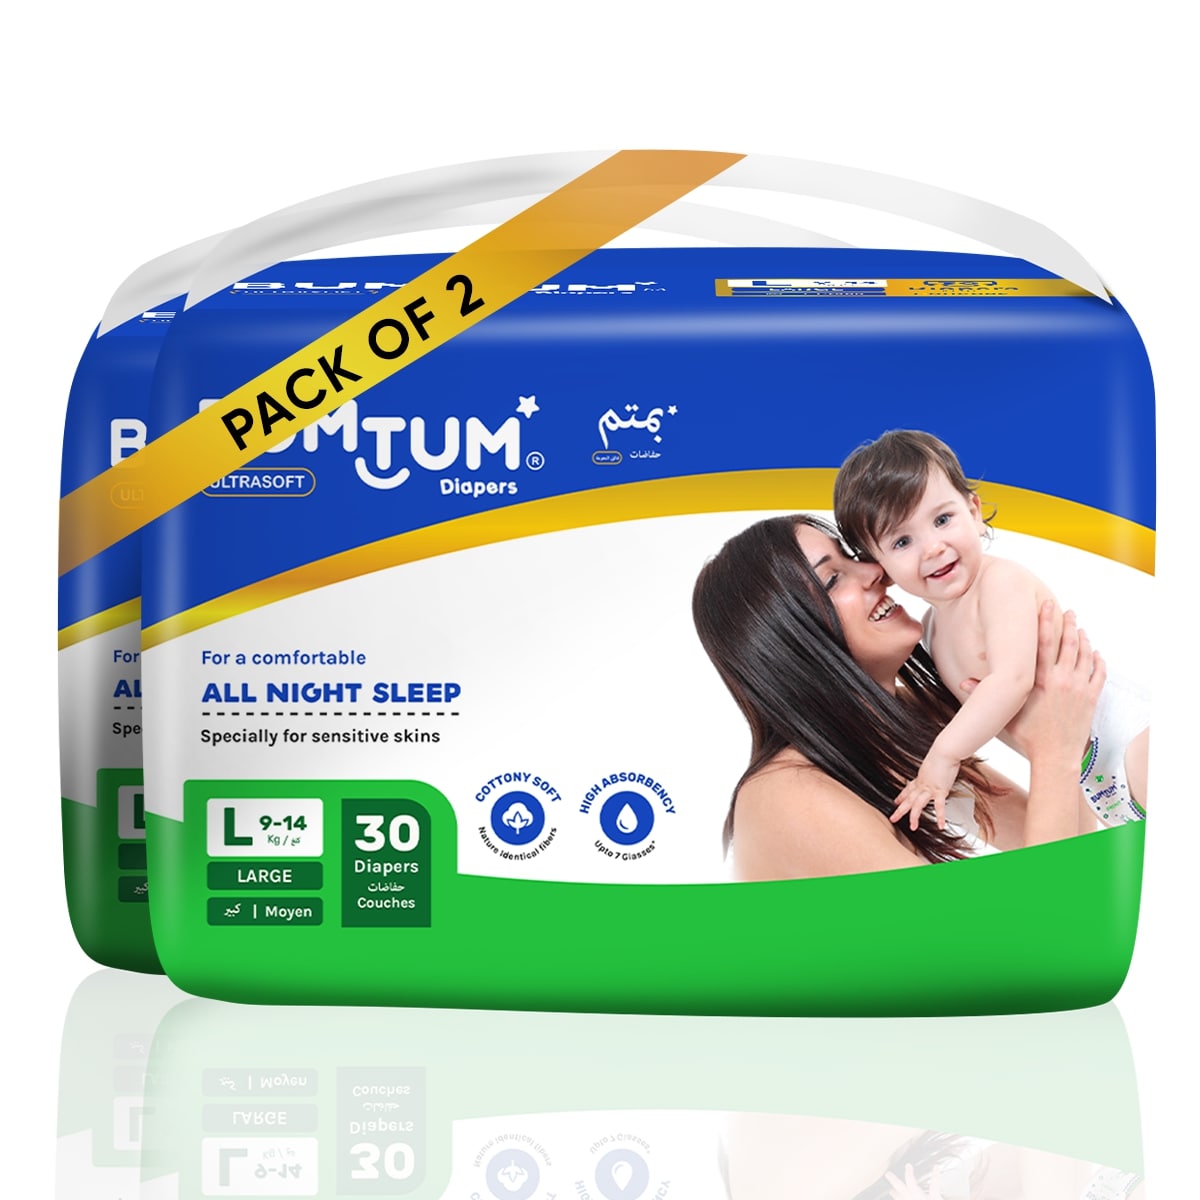 BUMTUM Baby Diaper Pants Double Layer Leakage Protection High Absorb  Technology - XXXL - Buy 24 BUMTUM Pant Diapers